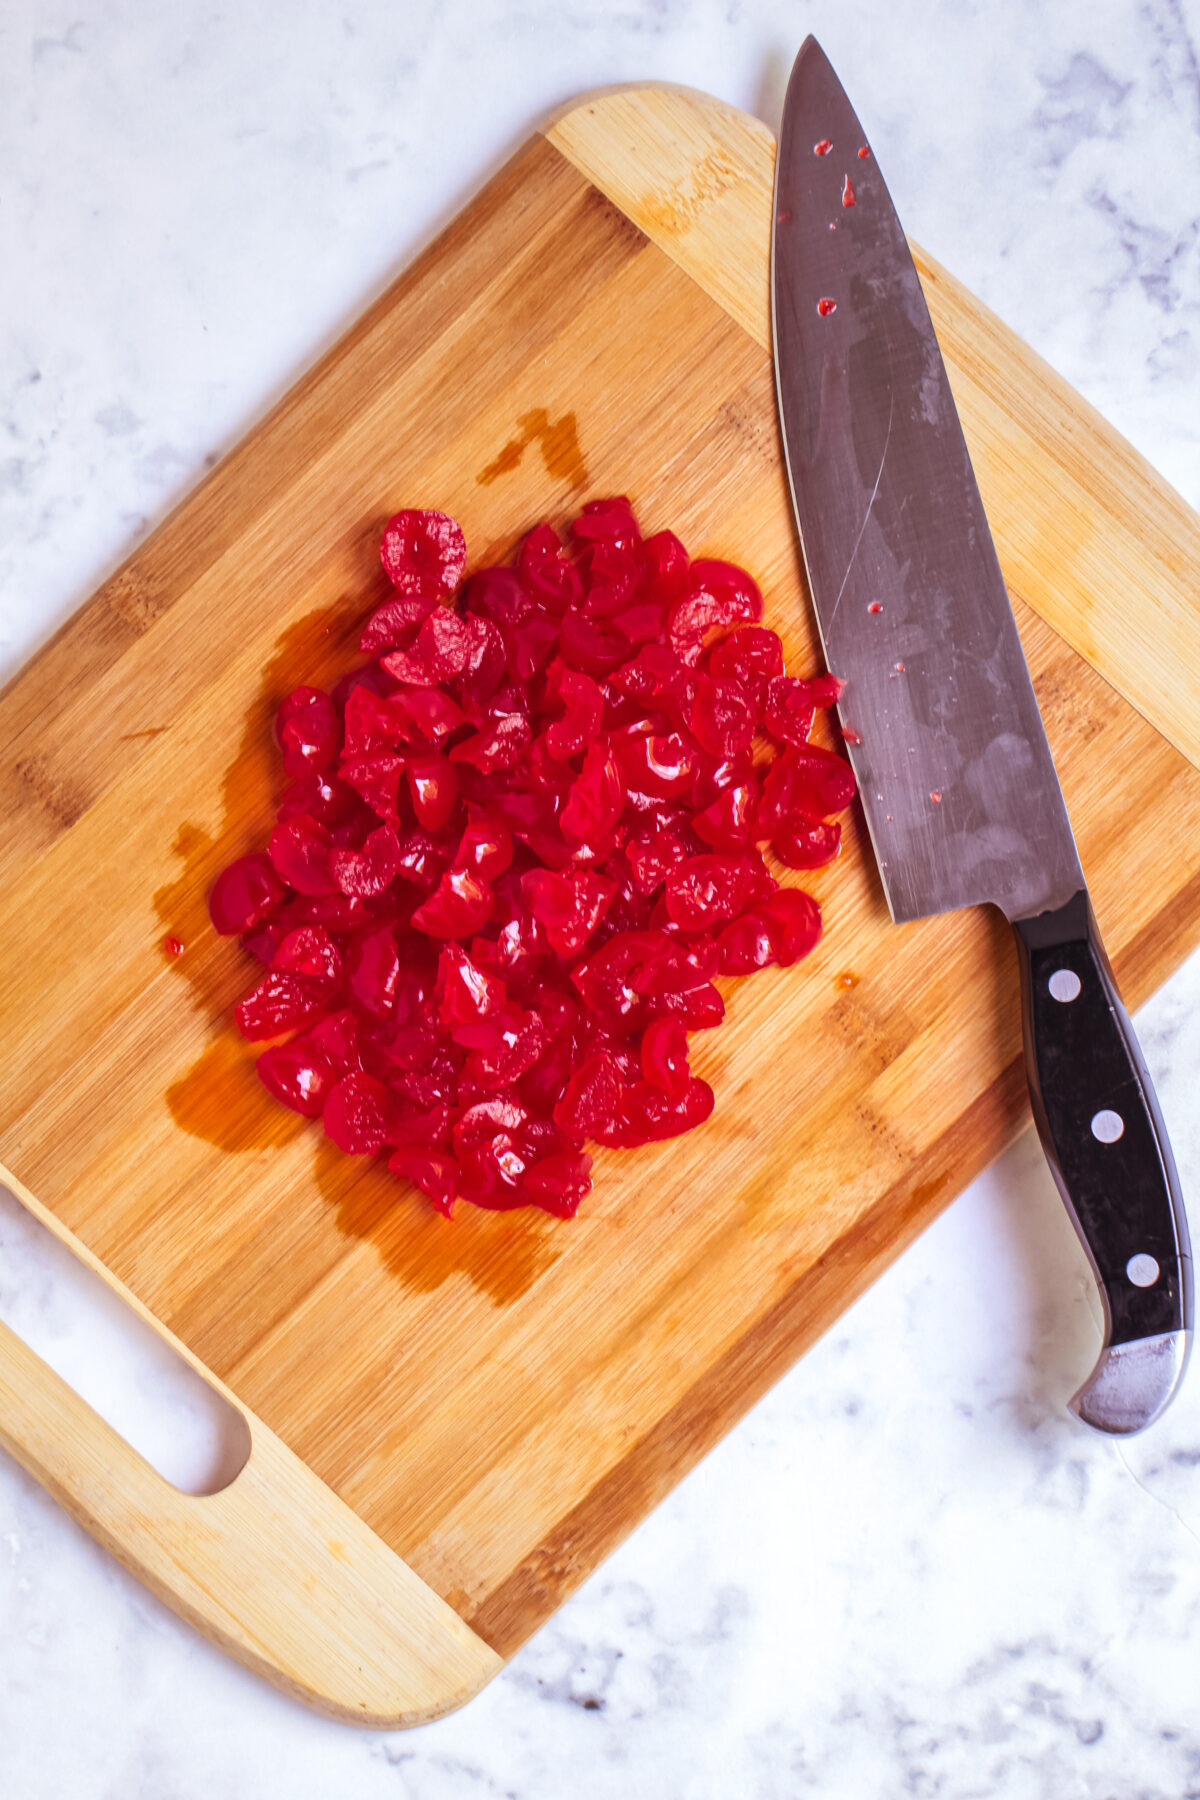 Cherries chopped up on a cutting board.